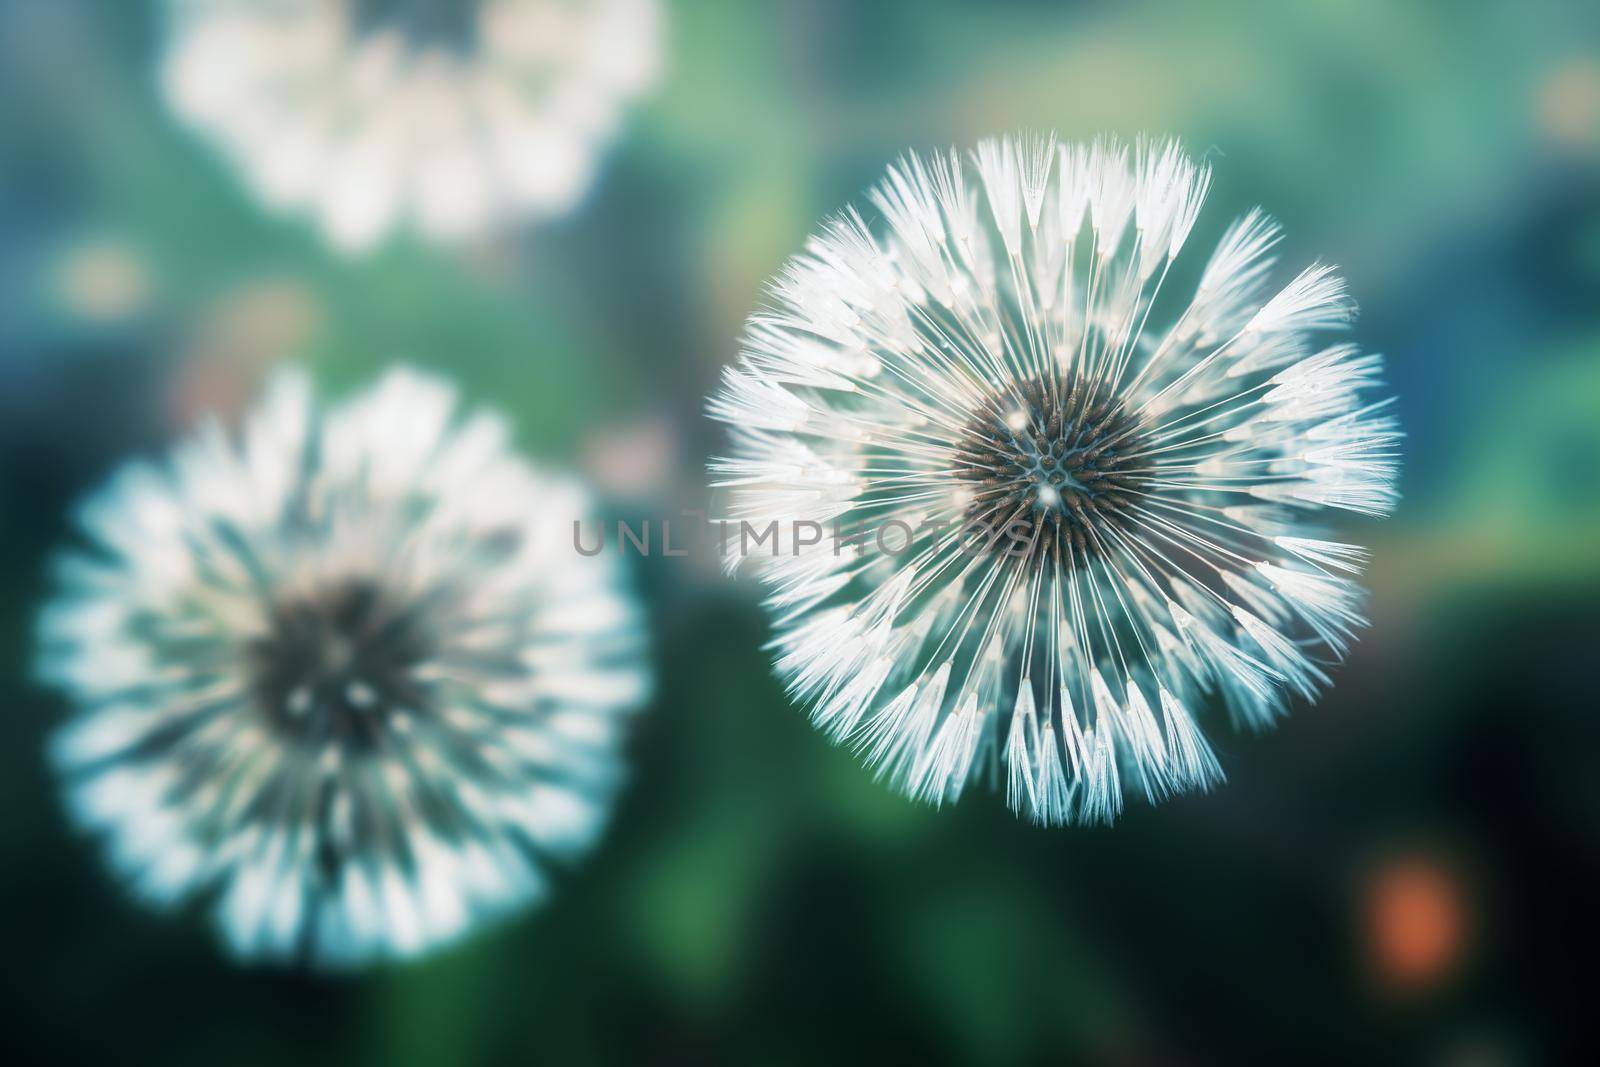 Dandelions photographed from above in a greenish atmosphere